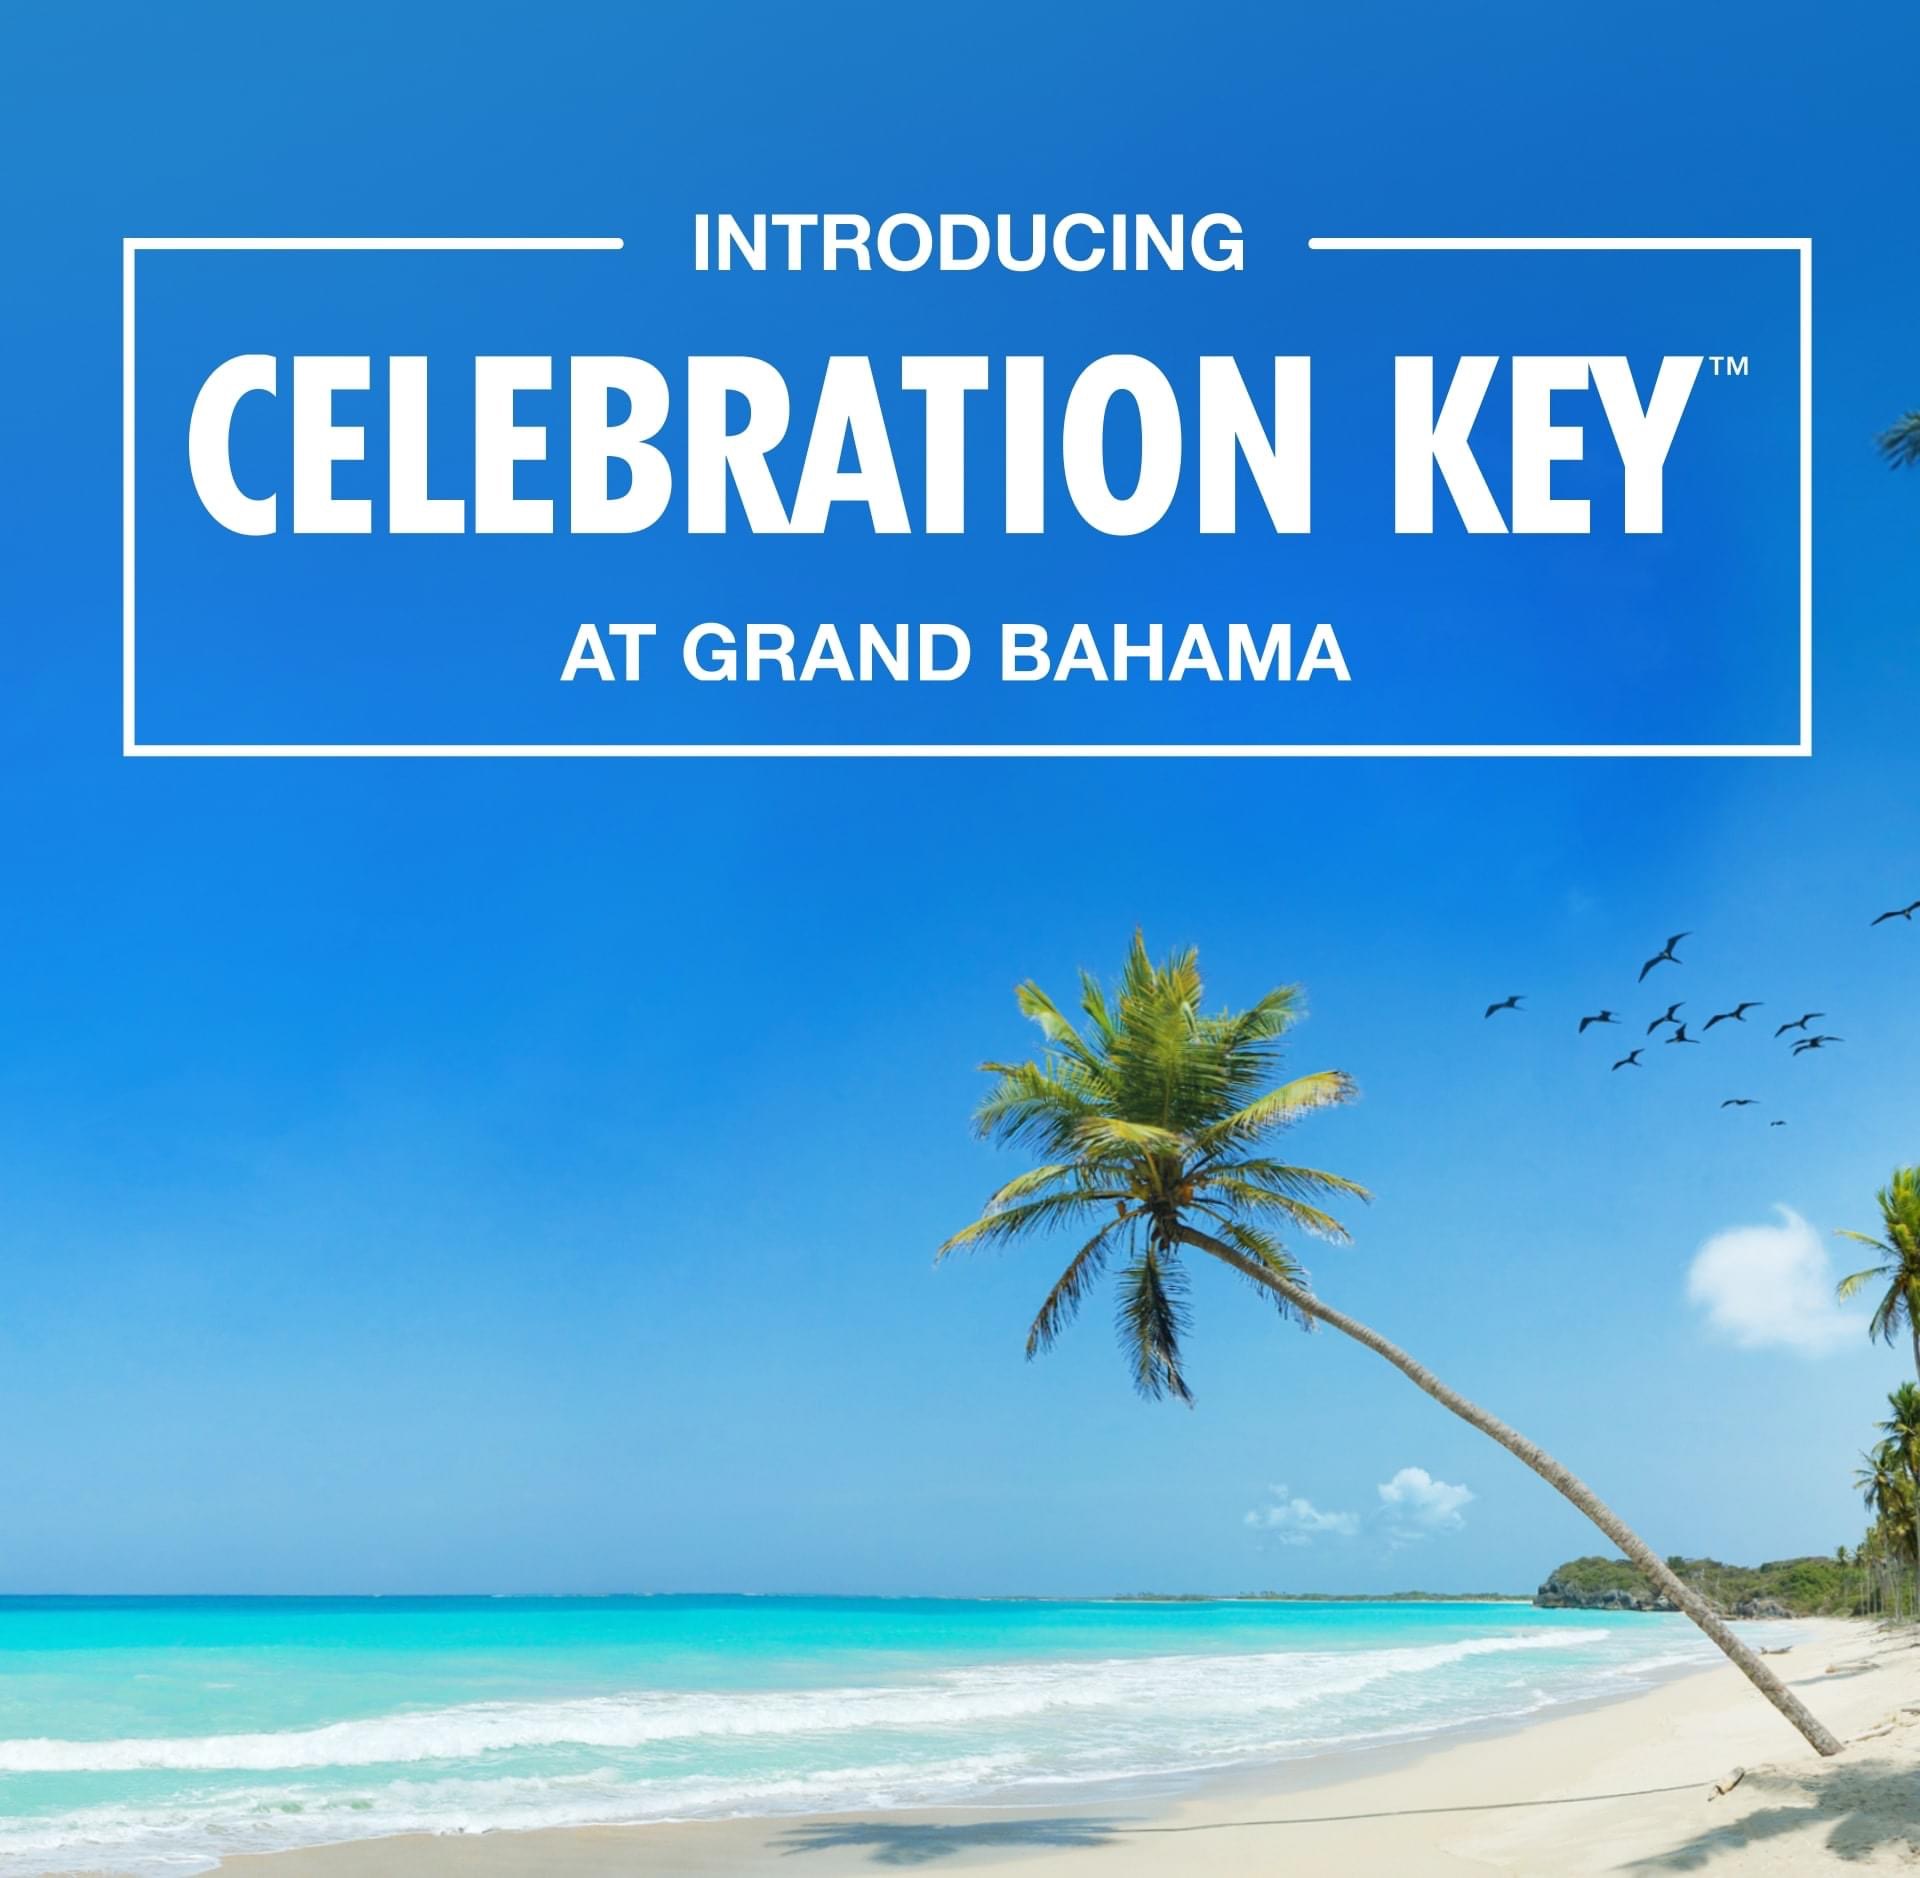 Carnival Cruise Line Invites Guests to be the "First to Know About Celebration Key" Details and Updates